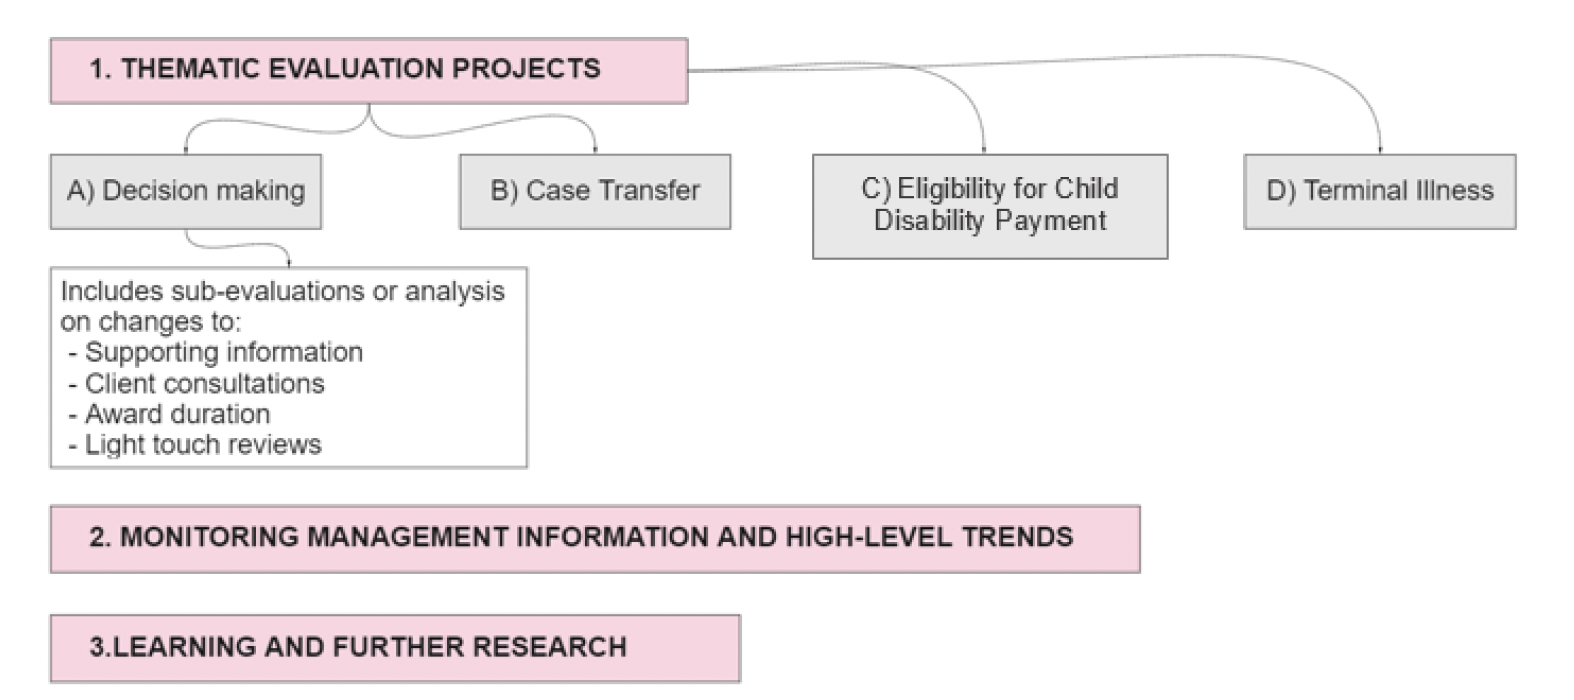 Figure 1 shows the four thematic evaluation projects (decision-making, case transfer, eligibility for Child Disability Payment and Terminal Illness) as well as the probably sub-evaluations involved in the broader decision-making project (including supporting information, client consultations, award duration and light touch reviews). The figure also highlights the other threads of evaluation activity, which are monitoring management information and high-level trends, and learning and further research.